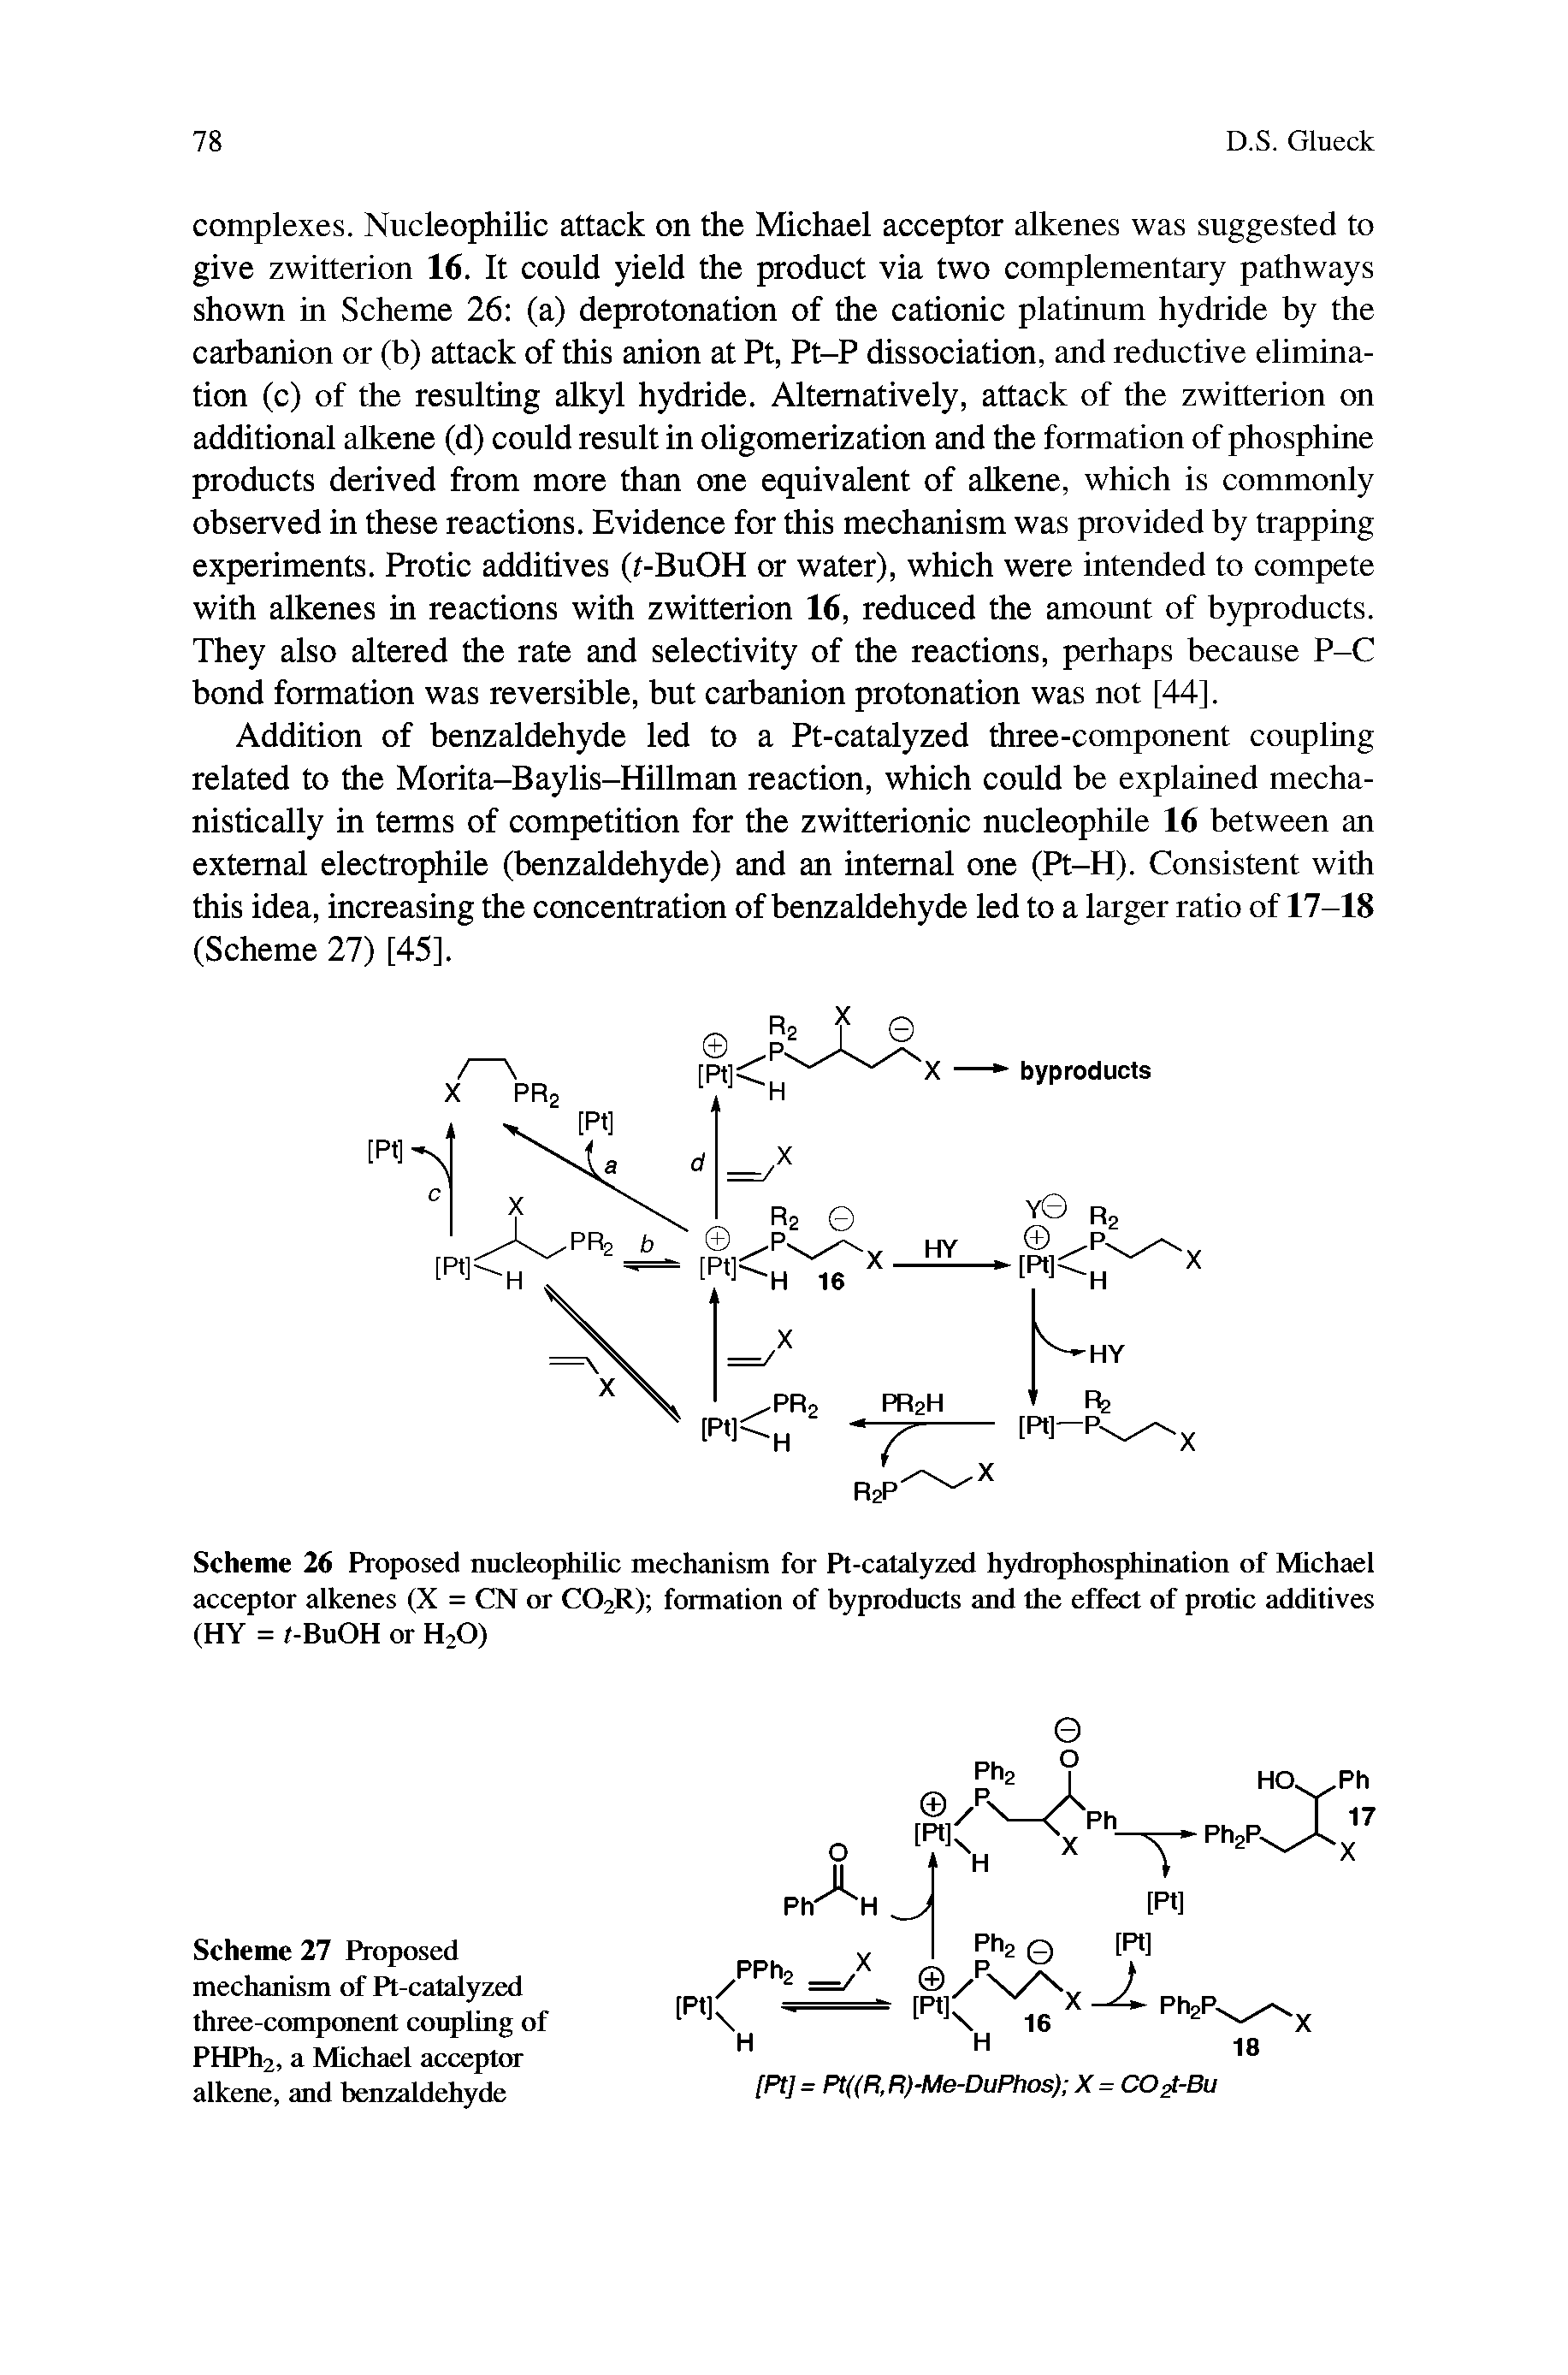 Scheme 26 Proposed nucleophilic mechanism for Pt-catalyzed hydrophosphination of Michael acceptor alkenes (X = CN or CO2R) formation of byproducts and the effect of protic additives (HY = t-BuOH or H2O)...